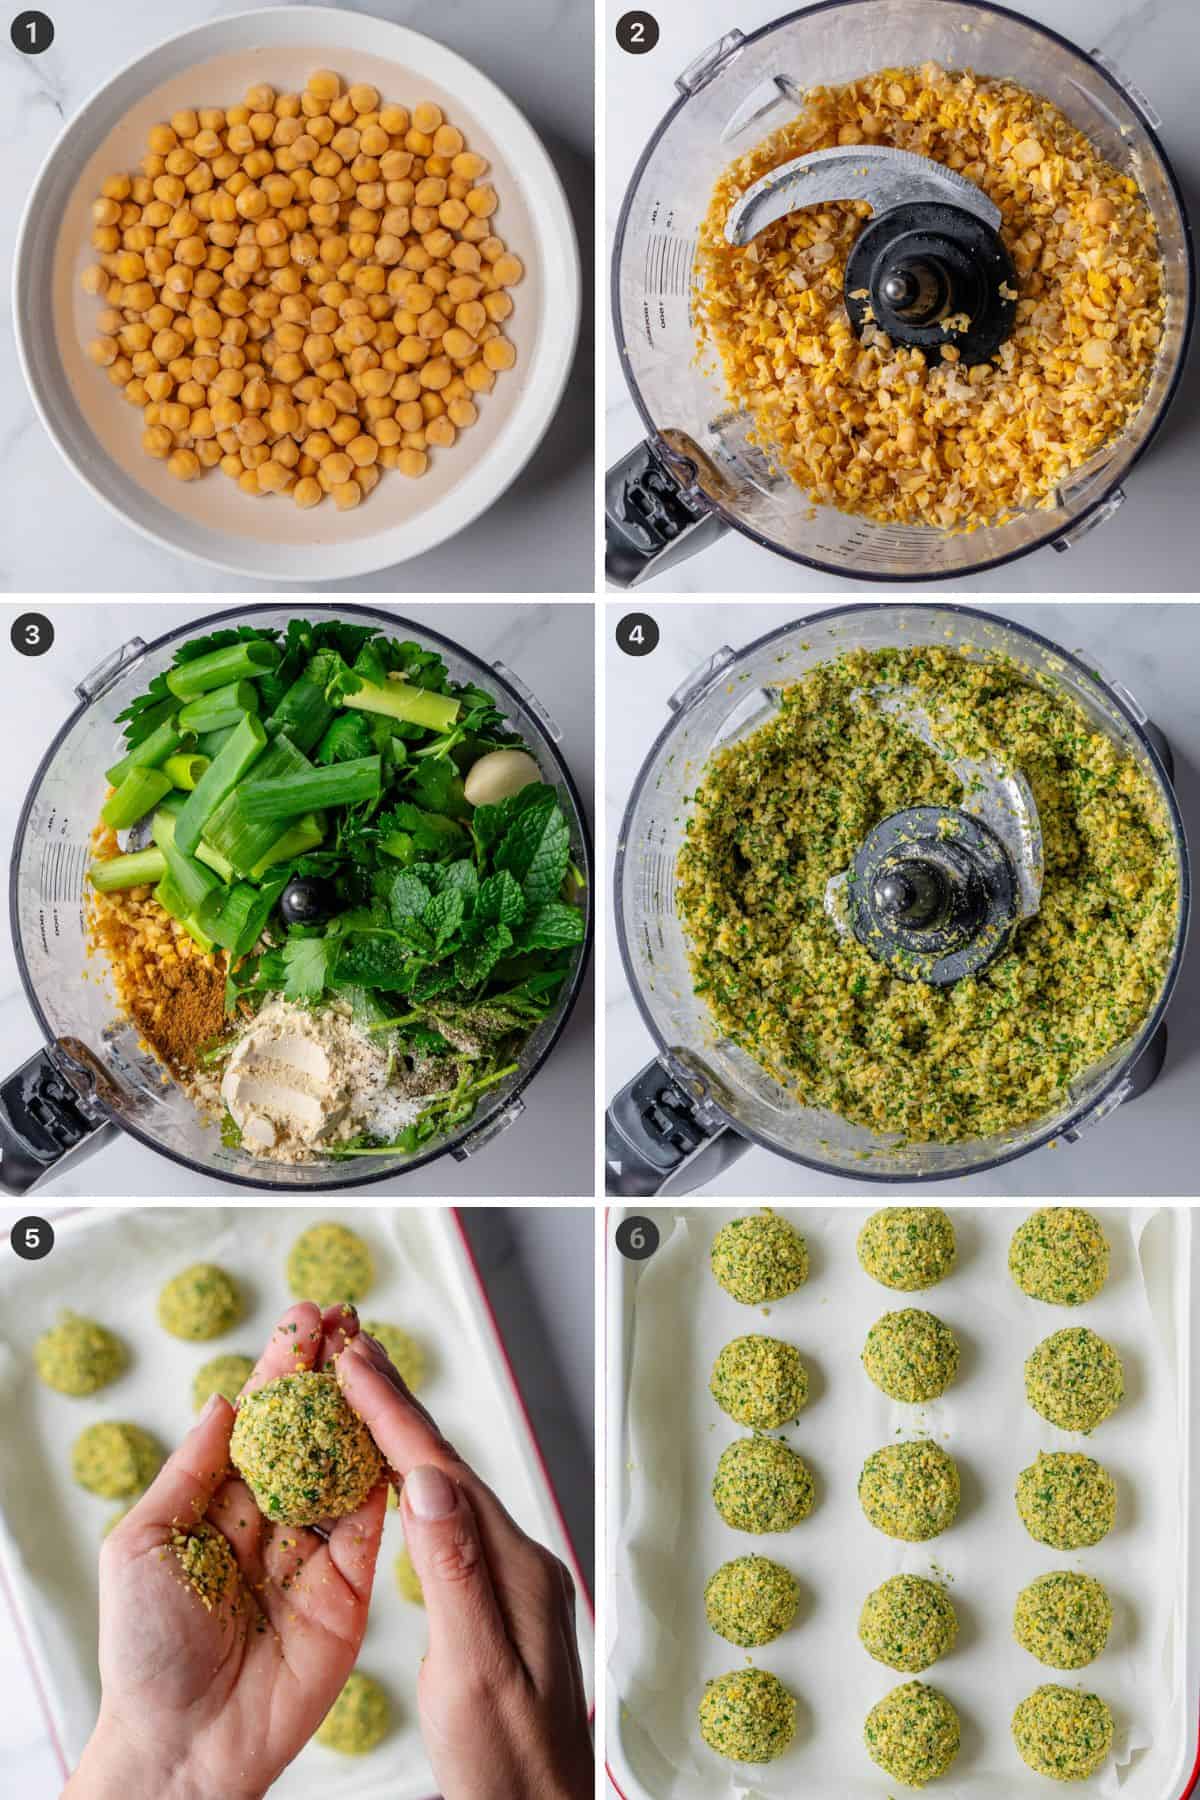 Steps 1 to 6 on how to make a falafel wrap